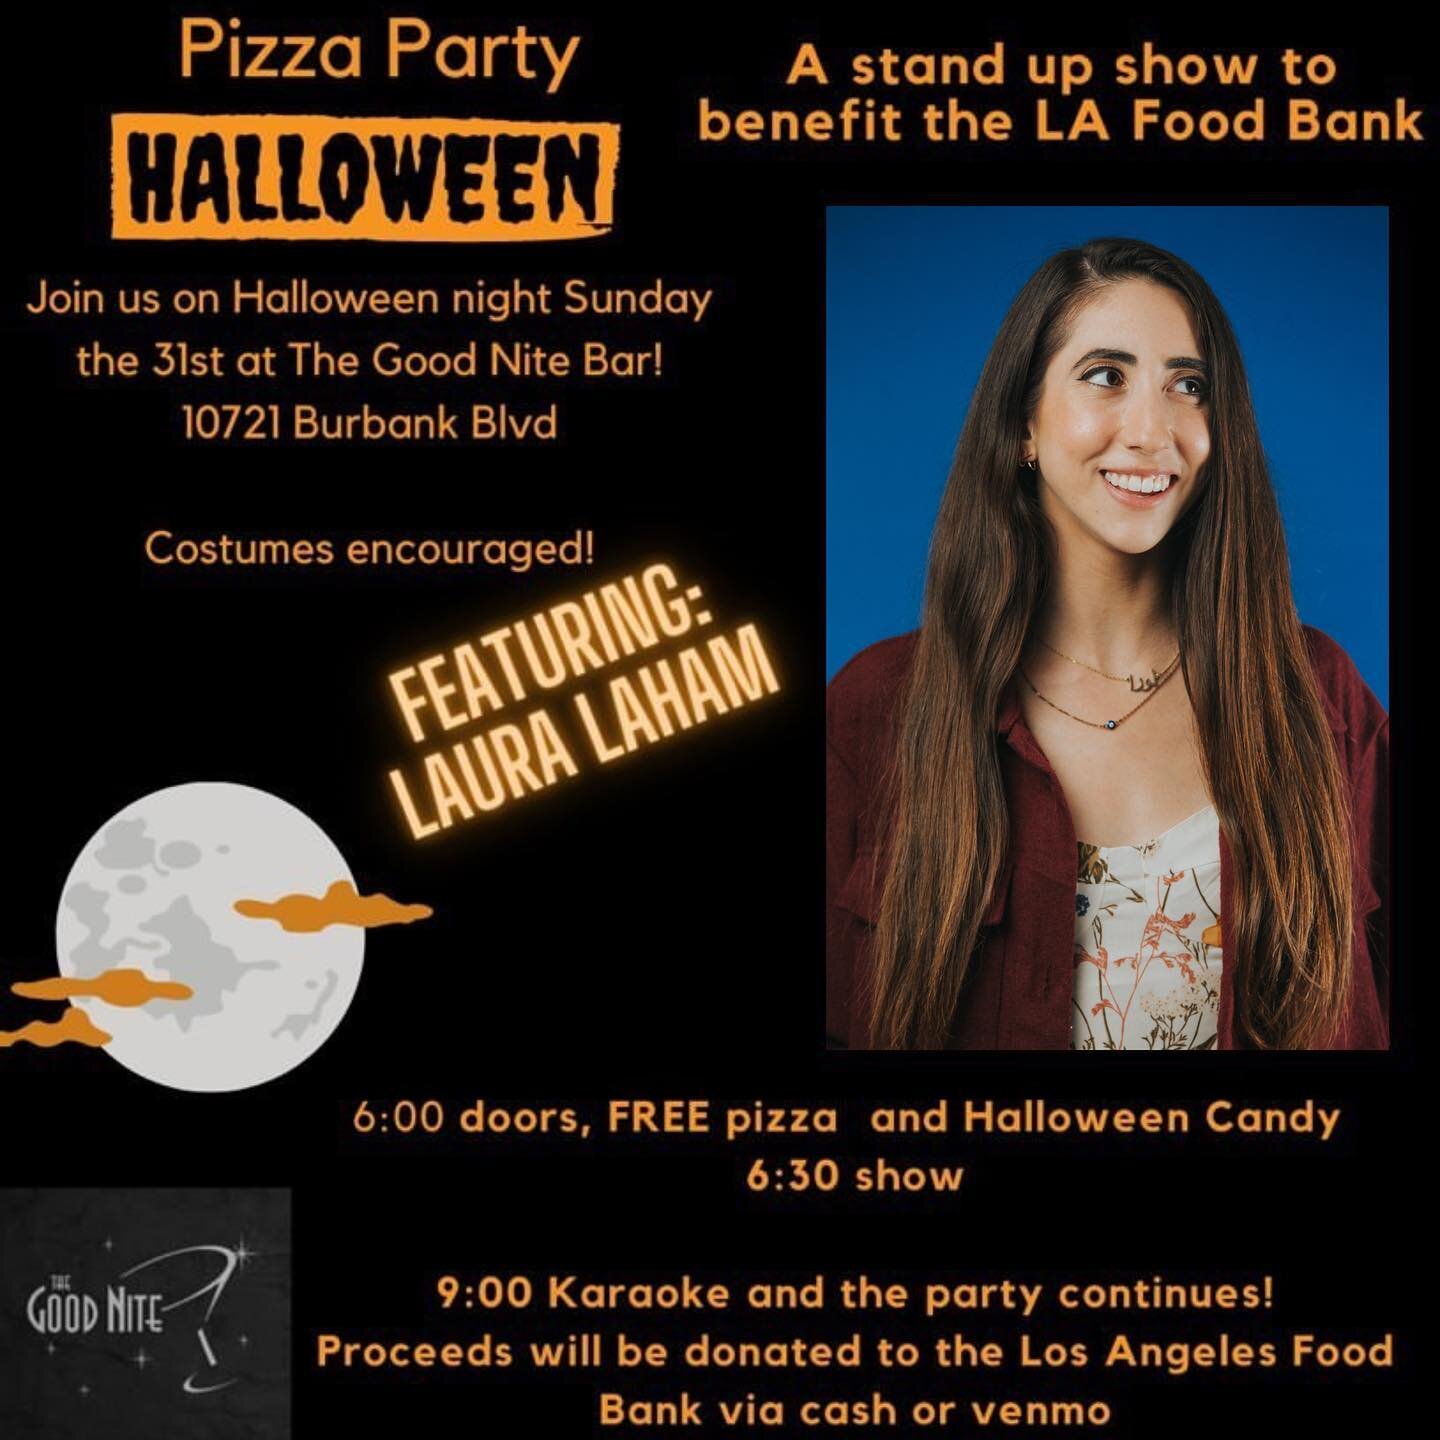 I&rsquo;m so friggin excited for Halloween this year.

Come to the Good Nite!
Pizza, candy, comedy, and best of all - ITS ALL FOR THE LA FOOD BANK!
👍
#halloween #plans #comedy #fundraiser #standup